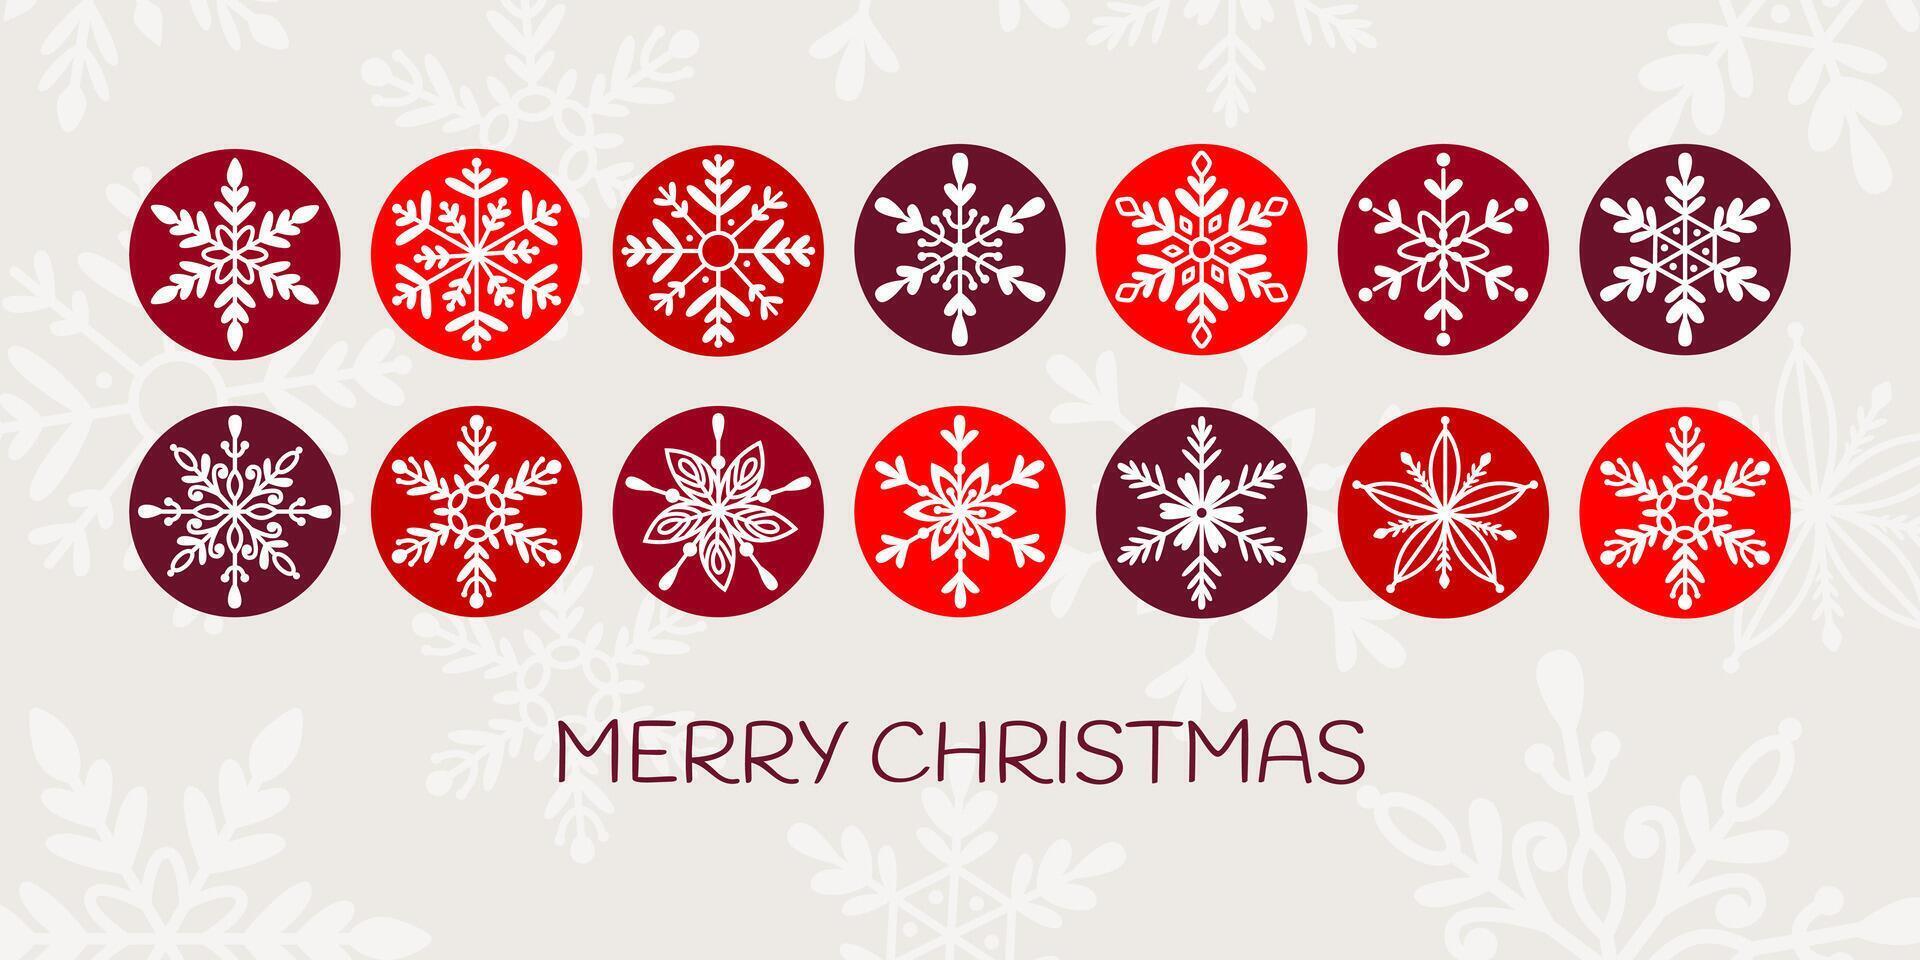 Merry Christmas abstract design with snowflakes in round frames. Xmas, celebration concept. For poster, greeting card, flyer, social media. vector